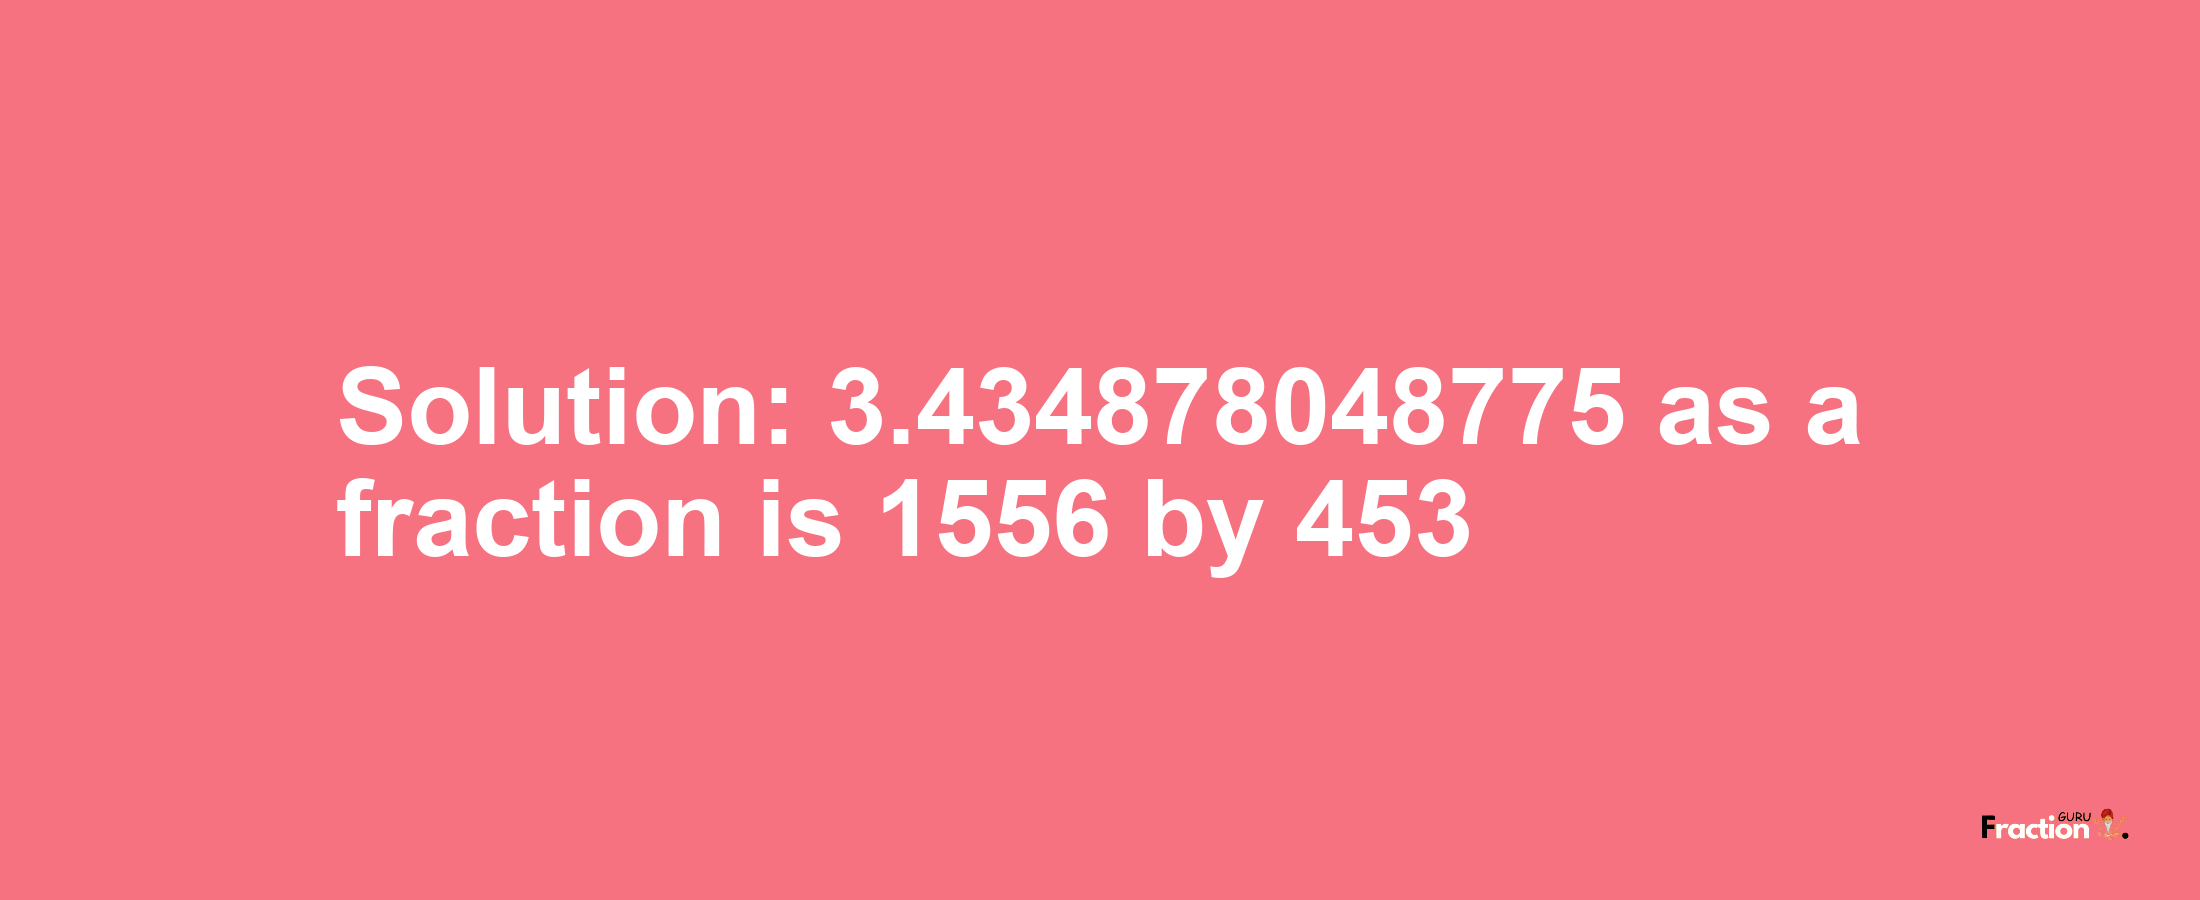 Solution:3.434878048775 as a fraction is 1556/453